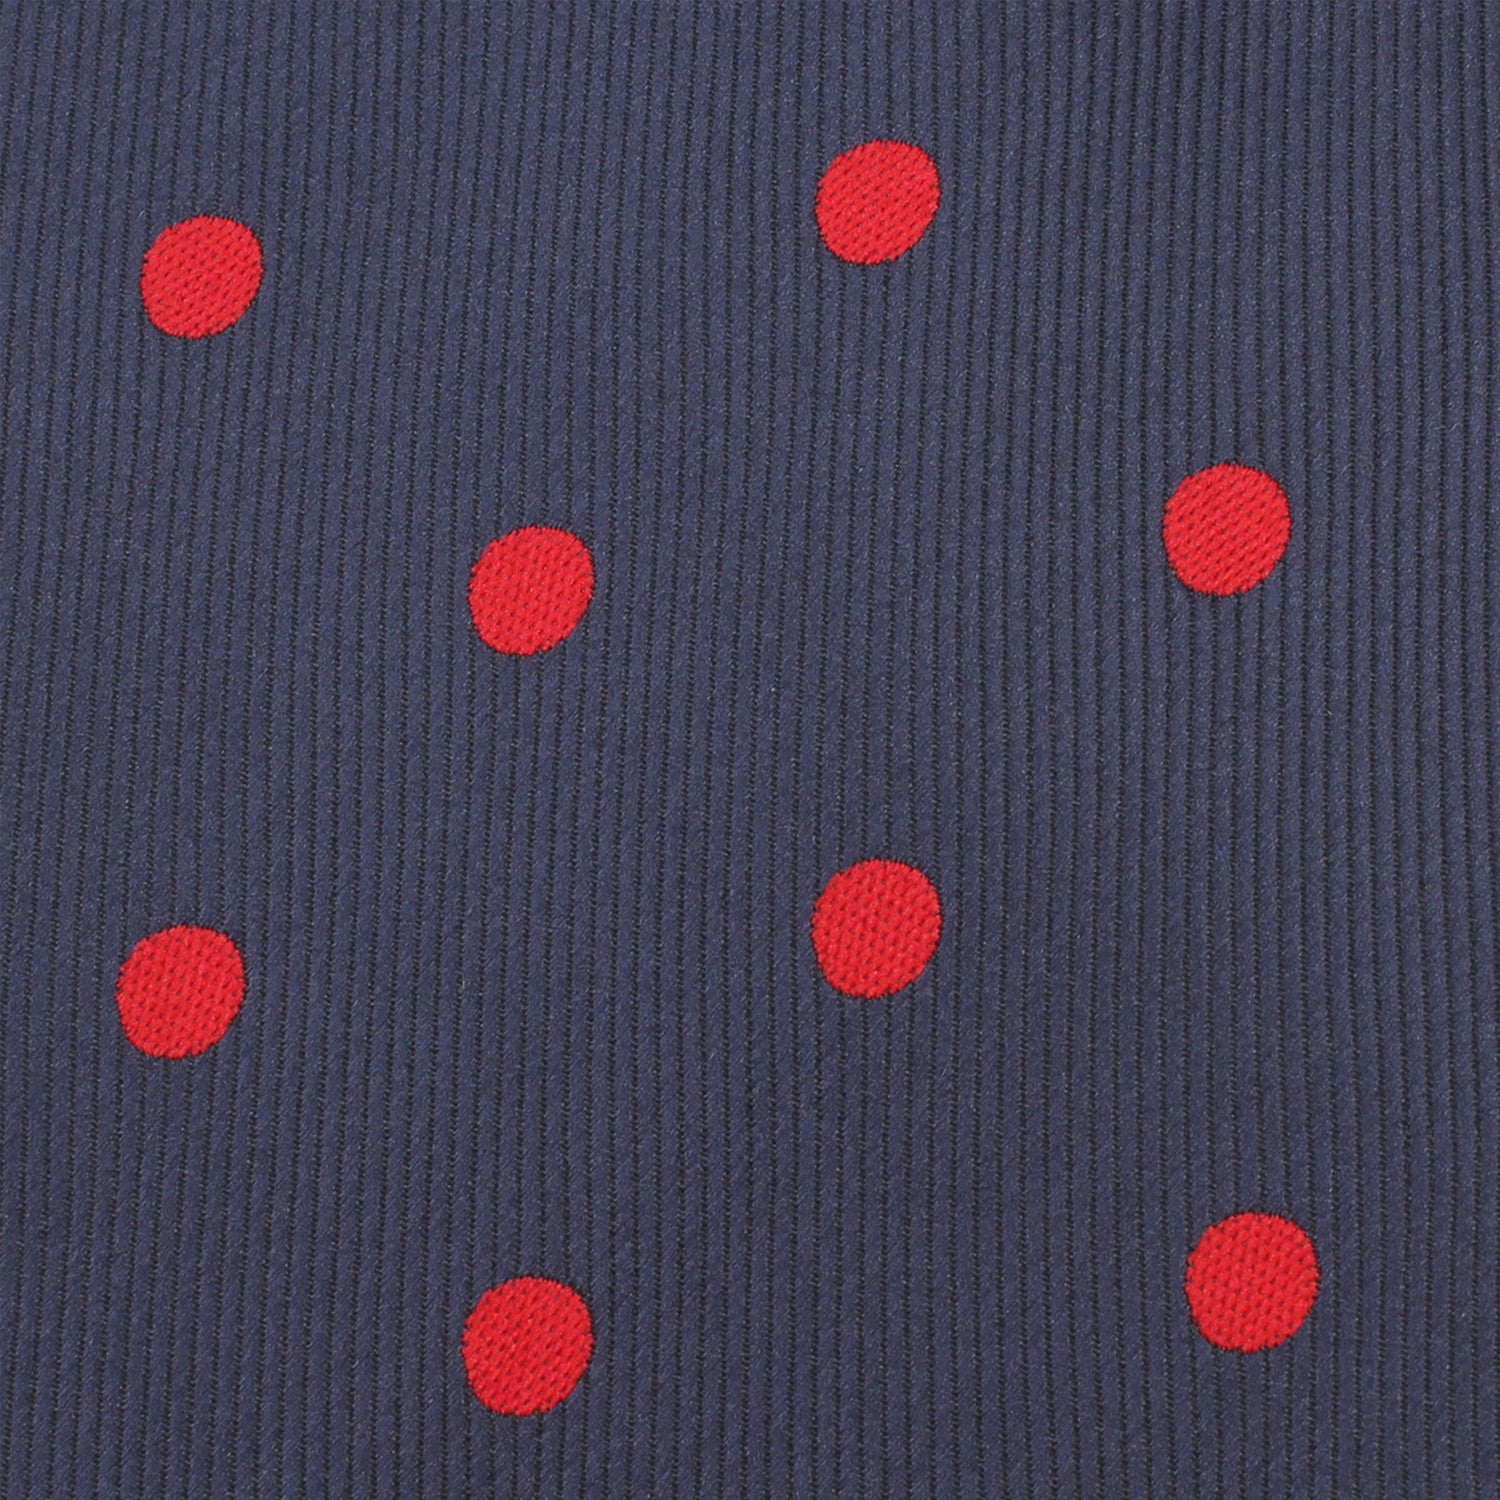 Navy Blue Tie with Red Polka Dots Fabric